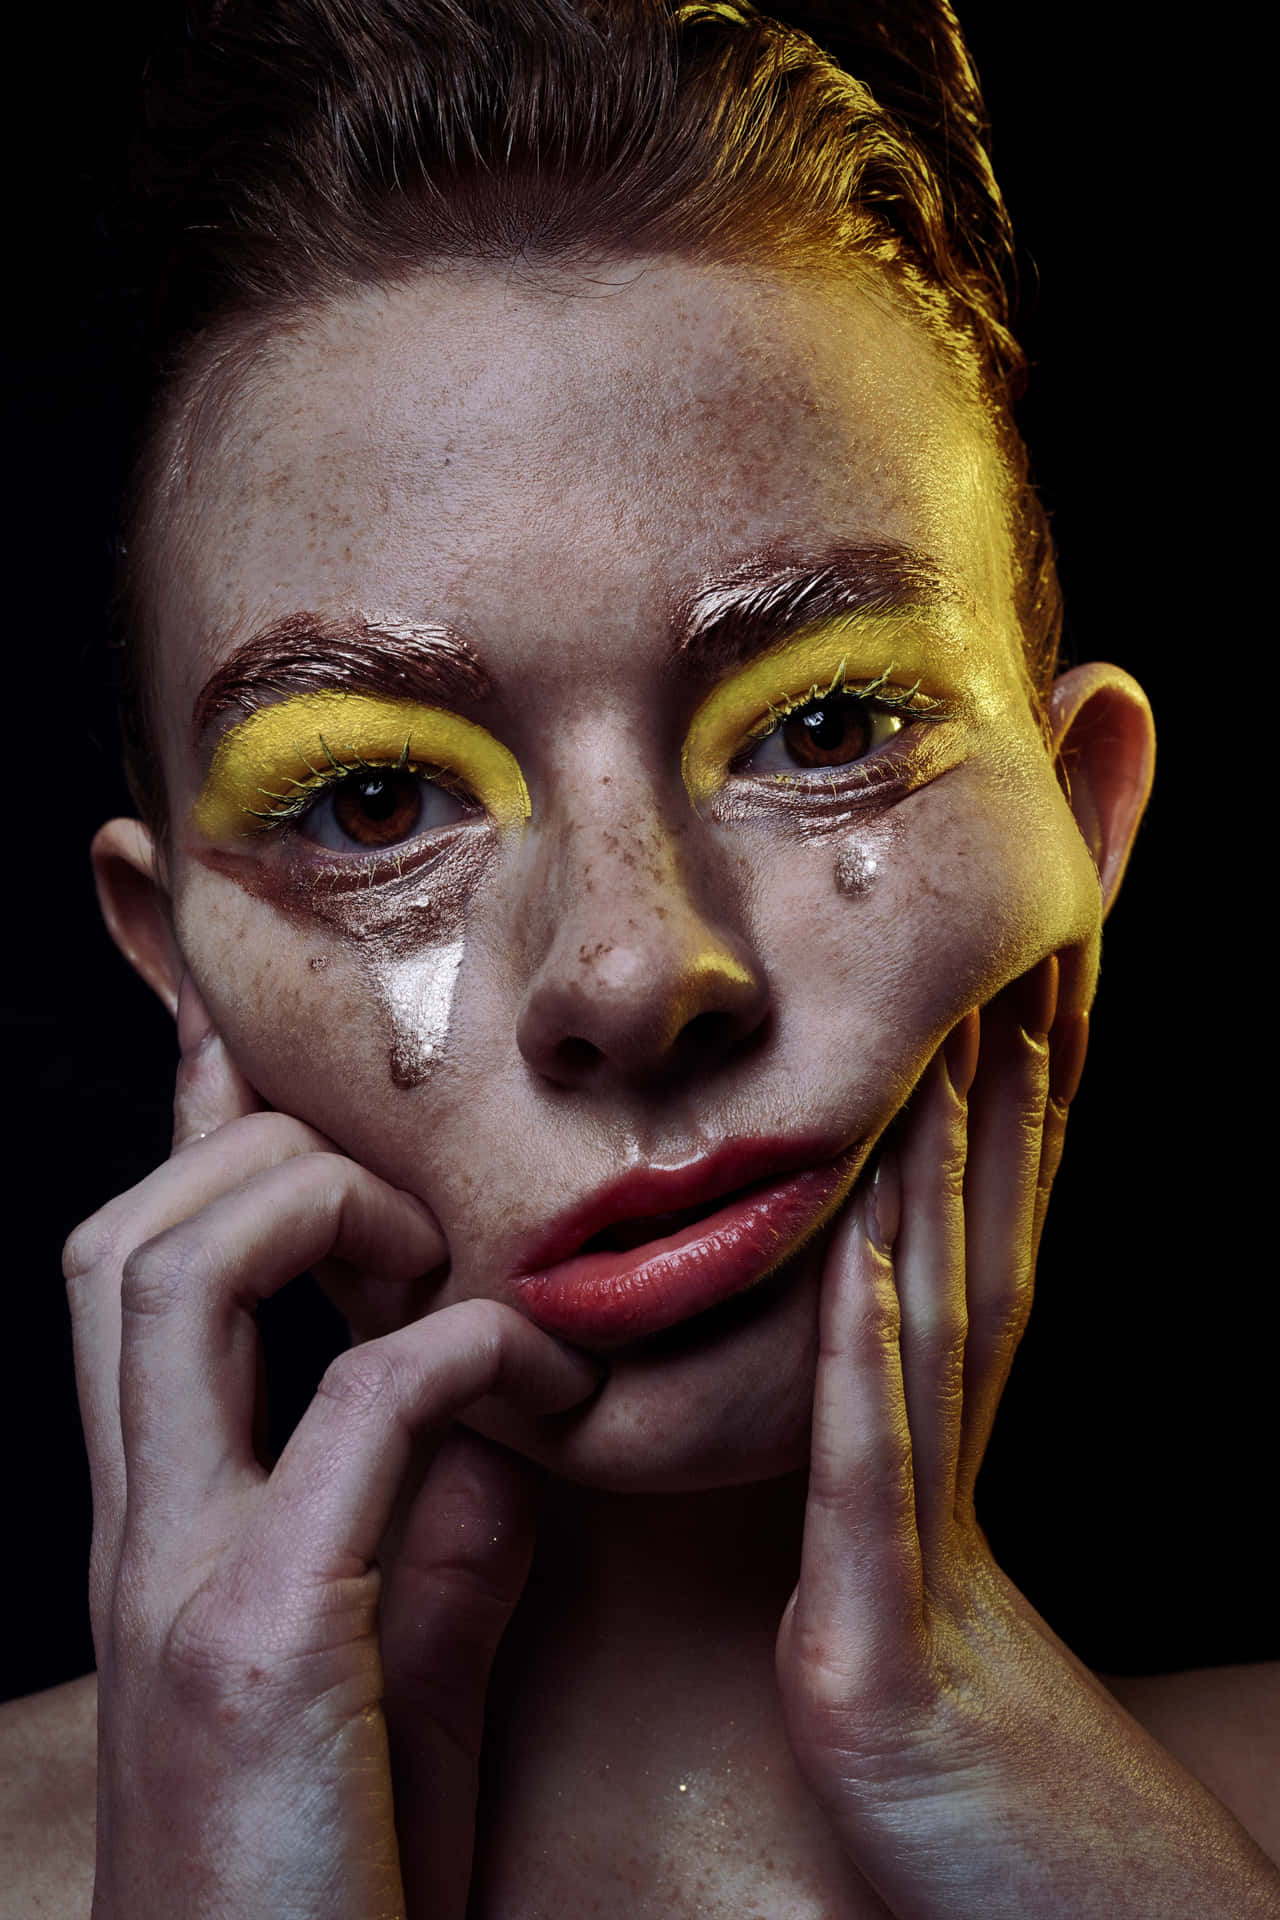 A Woman With Yellow Makeup And A Face Covered In Tears